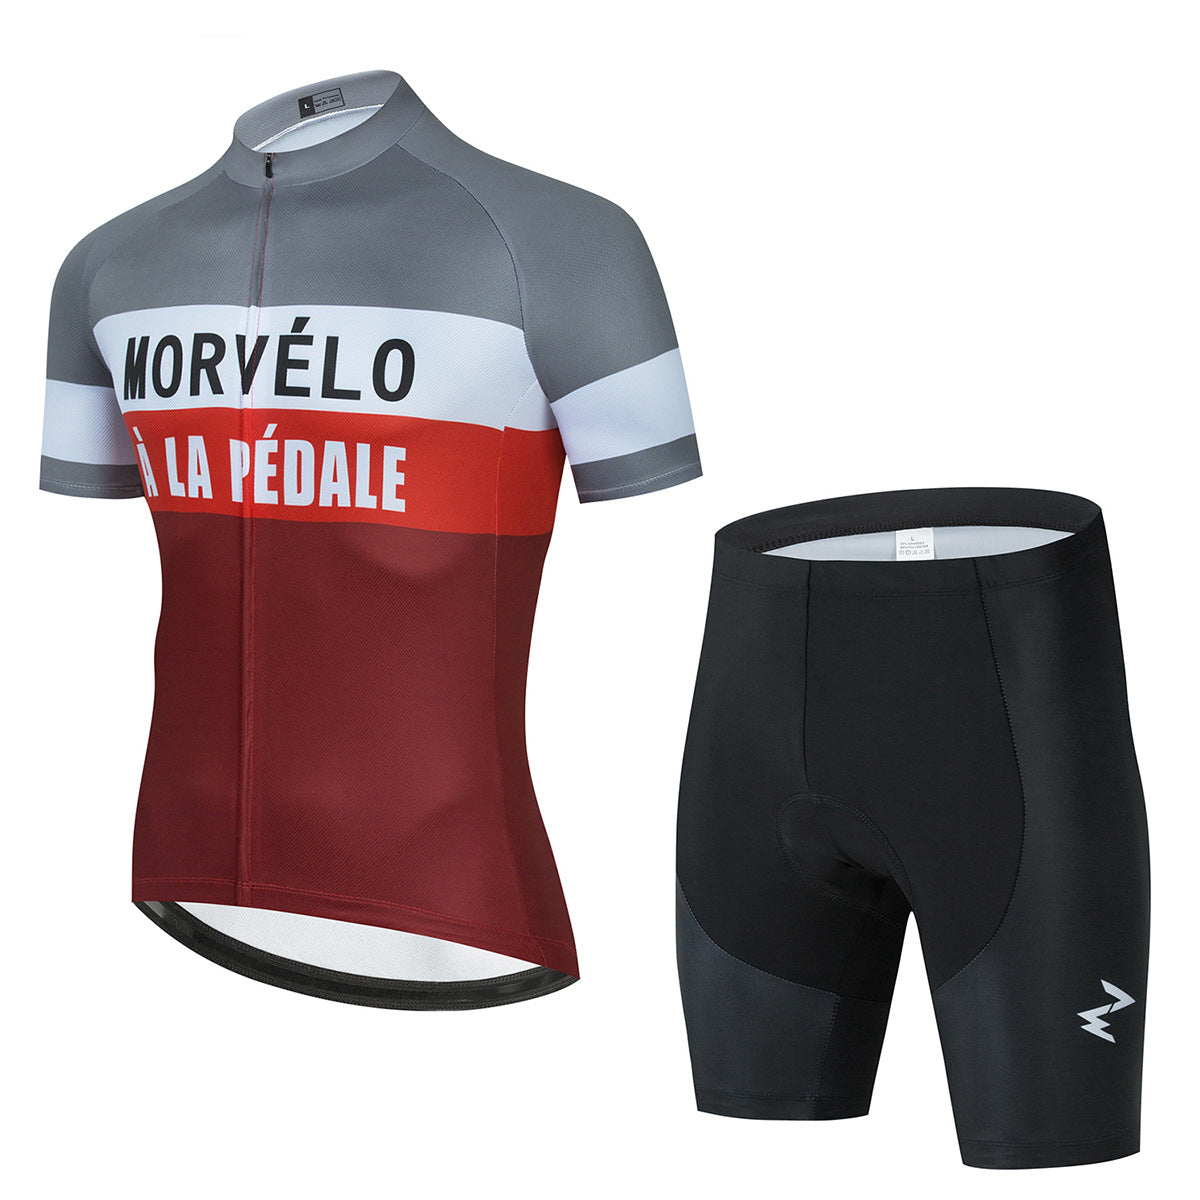 Summer Short-Sleeved Cycling Jersey Suit Breathable Bicycle Sportswear Uniform Custom Cycling Jersey